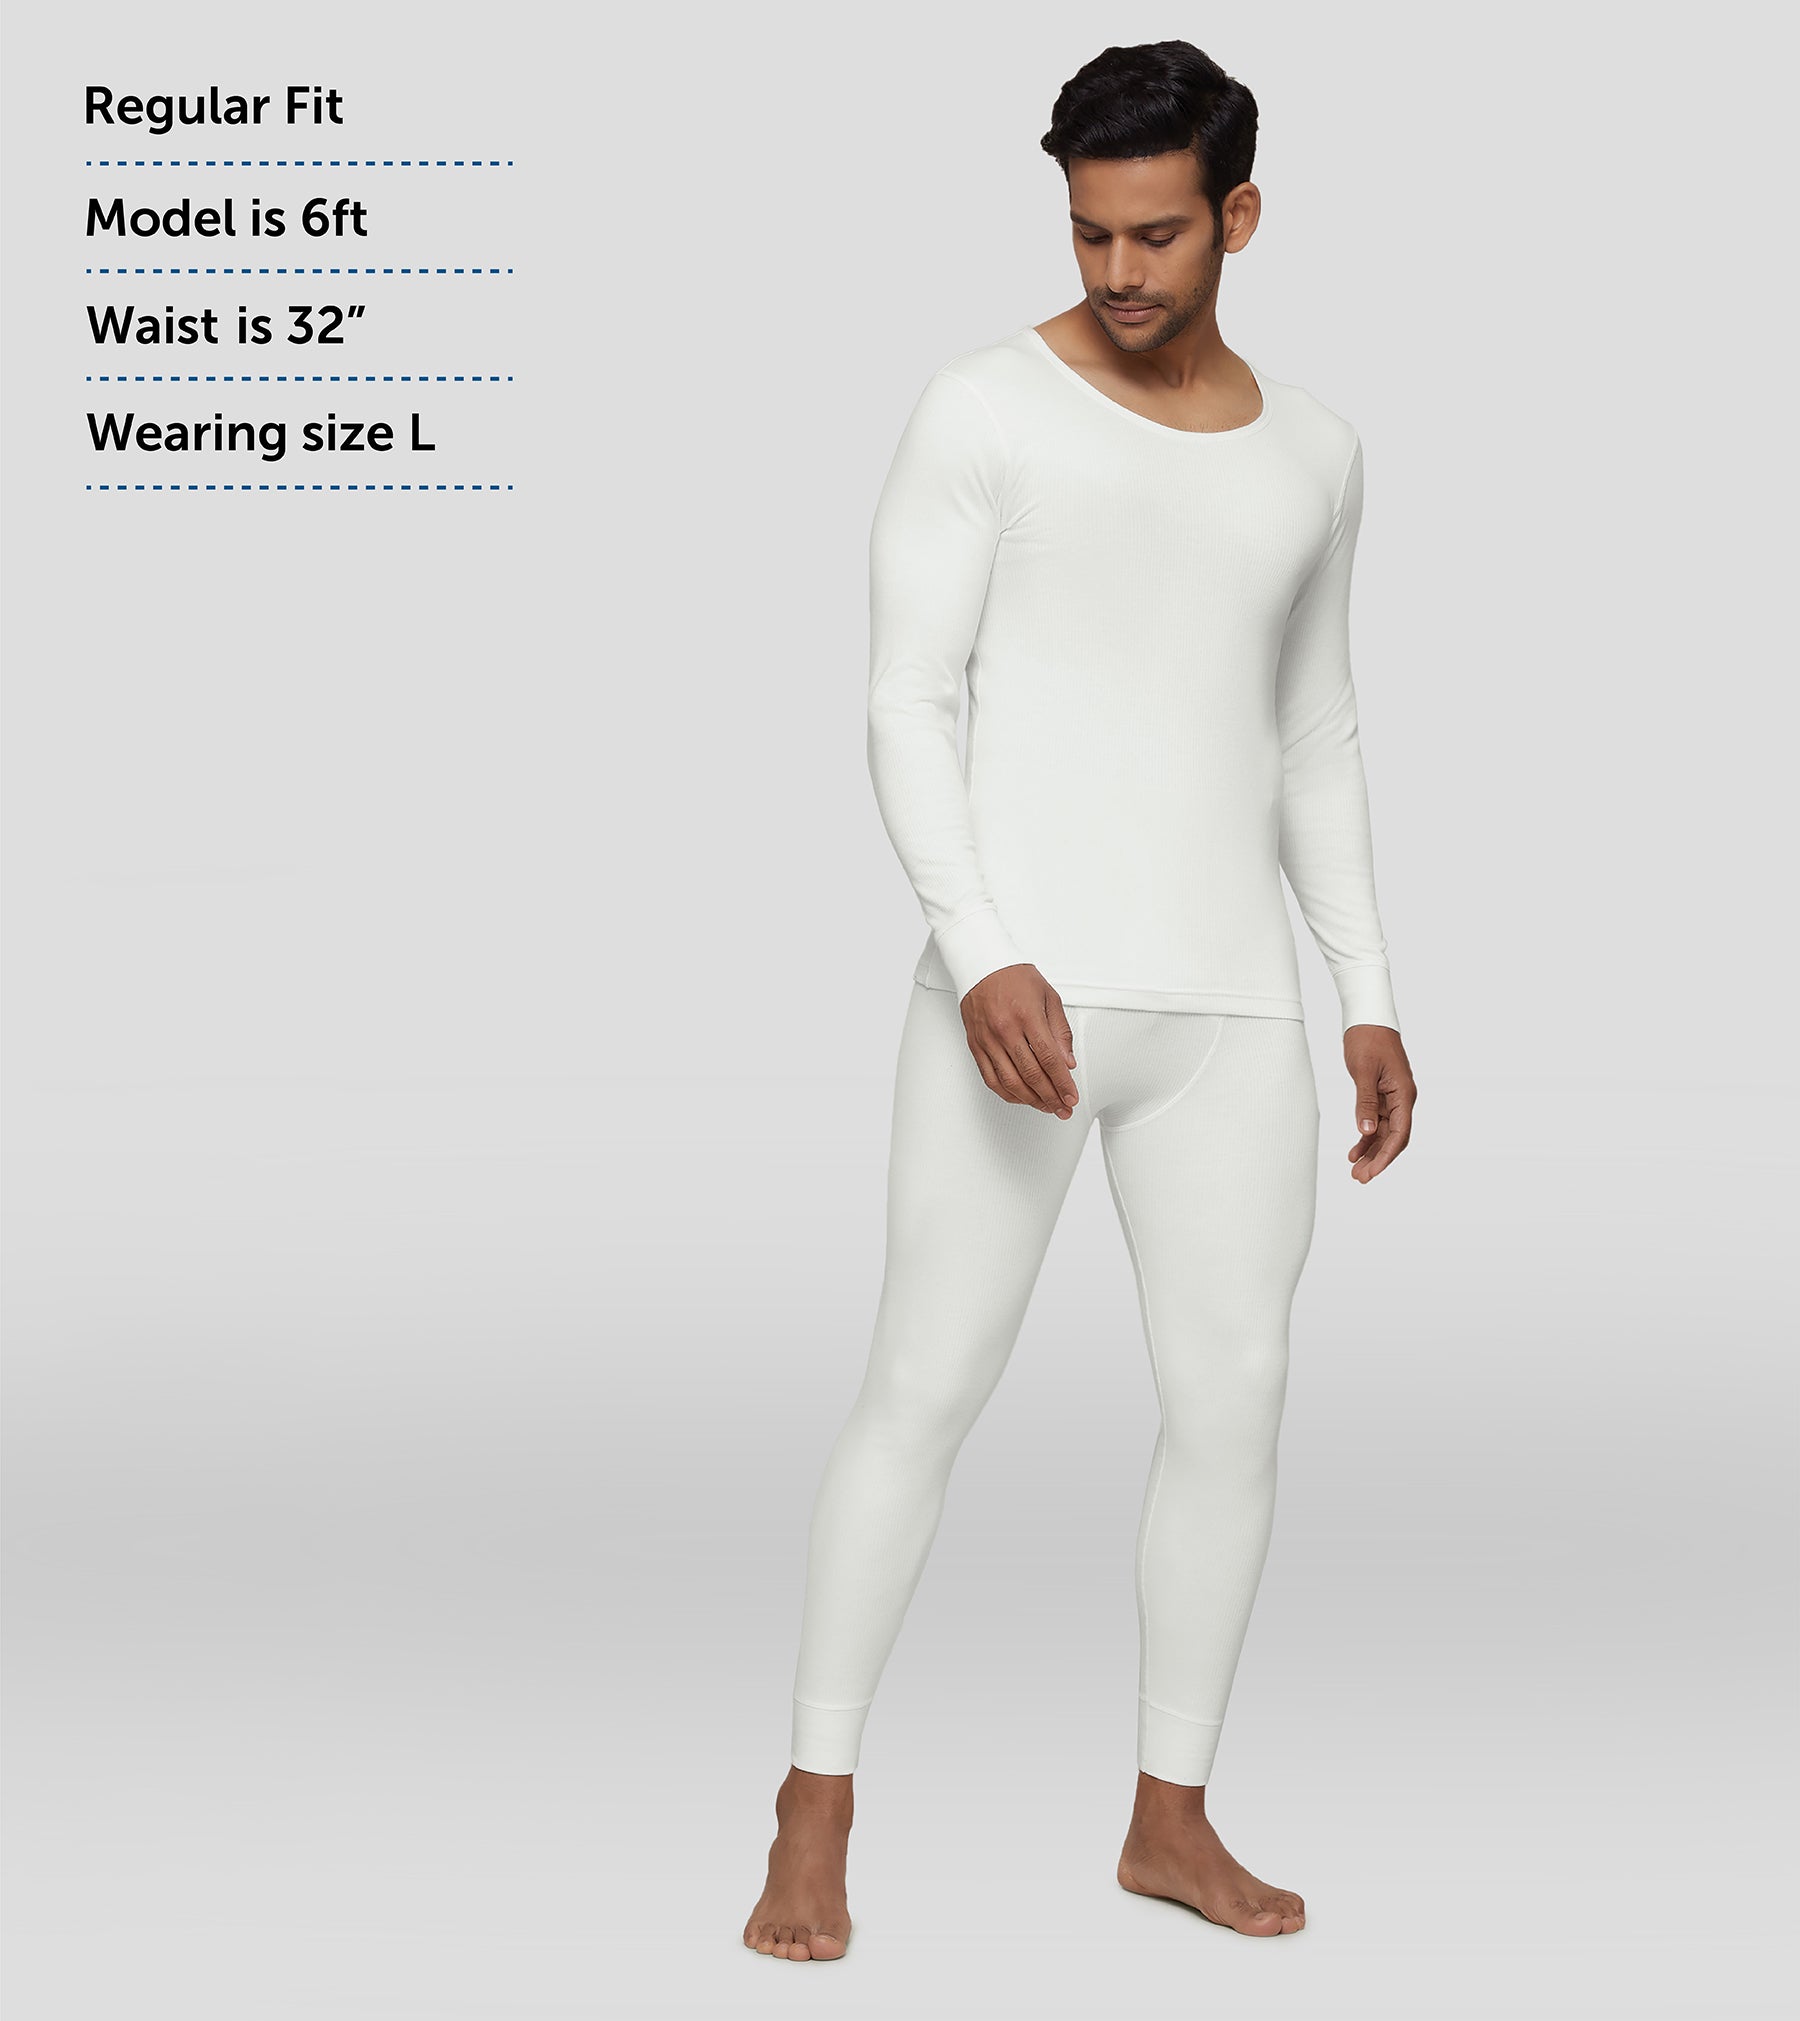 Mens White 2 Pack Cotton Blend Thermal Underwear Long Johns